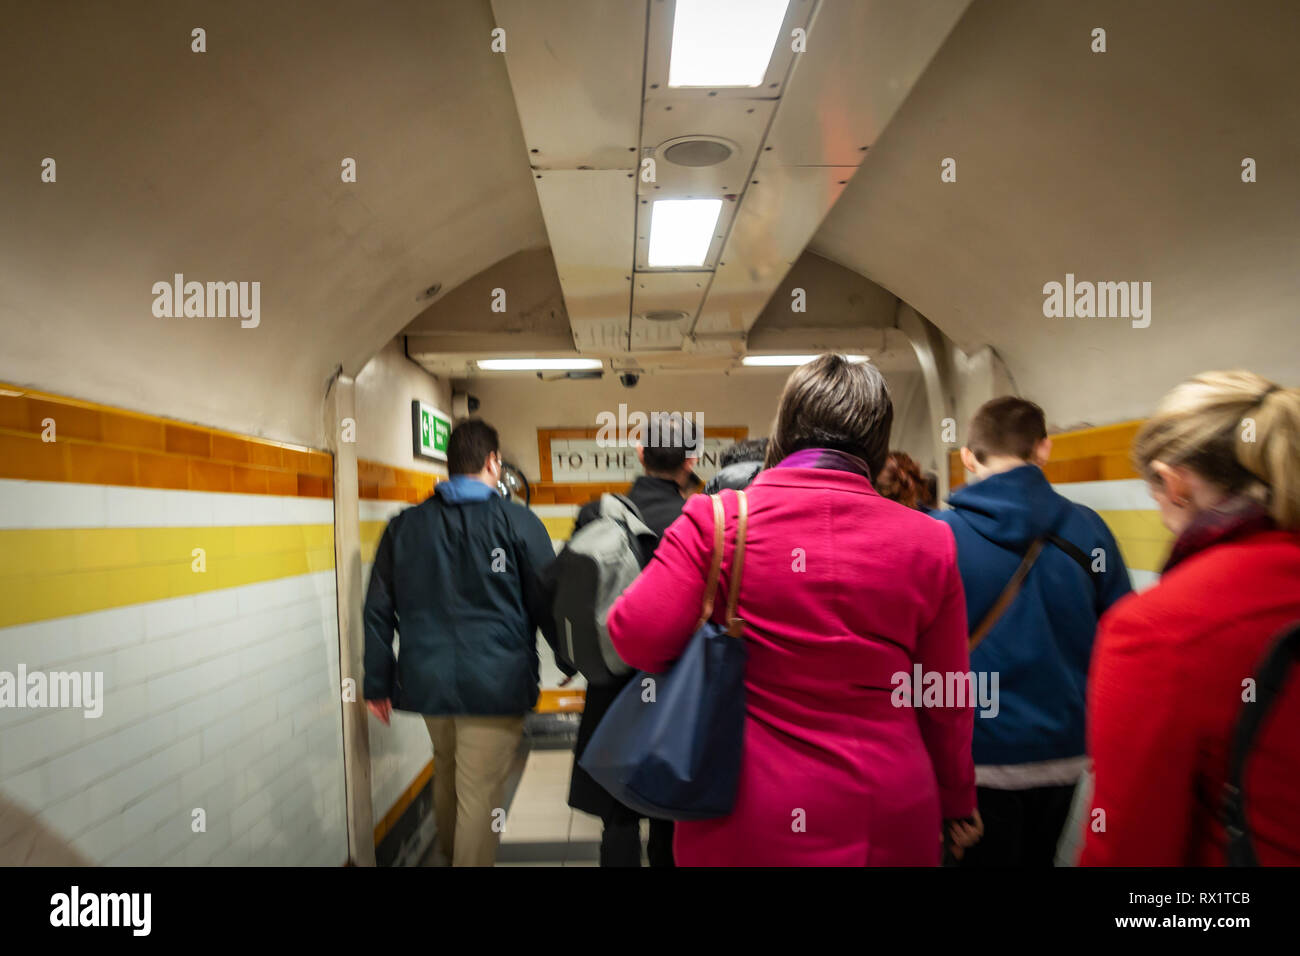 Rear view of Rush Hour Underground Tube commuters time as they travel down the stairs and passageways leading to the Tube in London Stock Photo